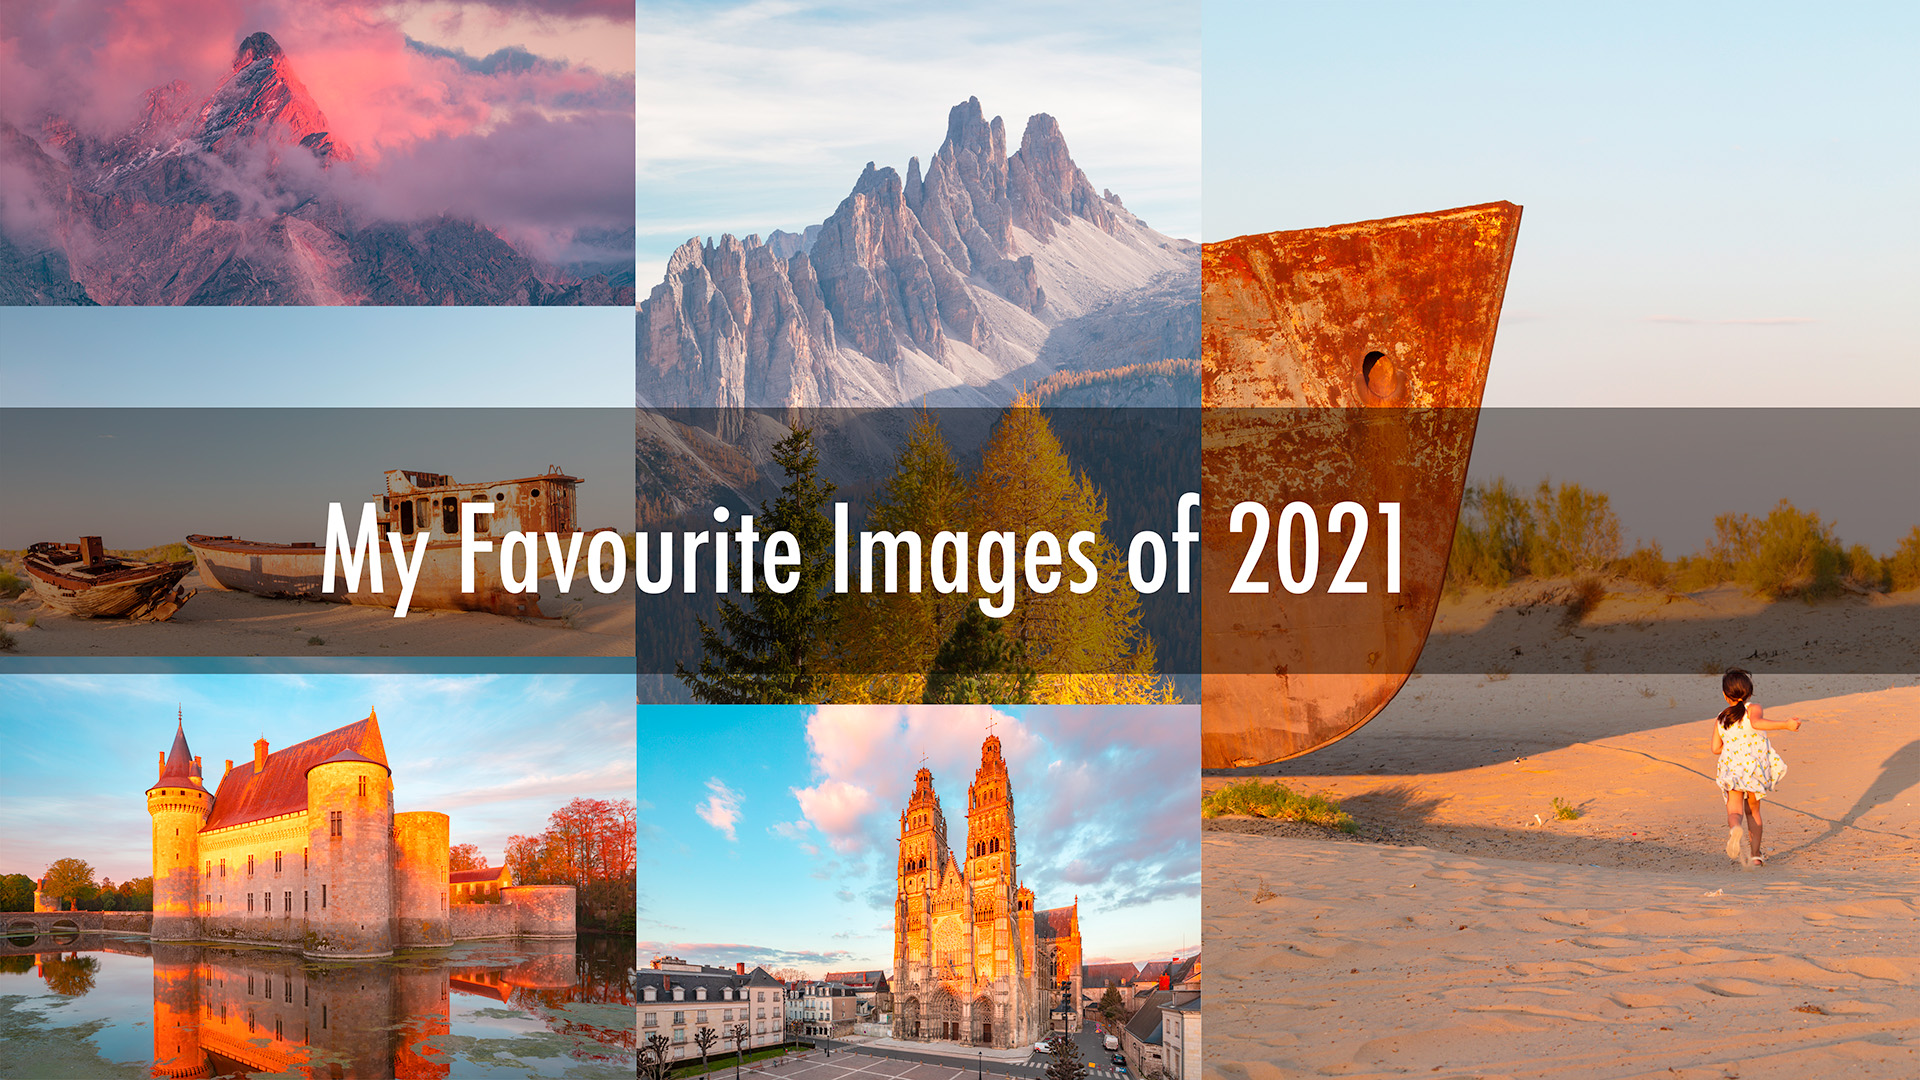 My favourite images of 2021. Landscape photography. Travel photography.